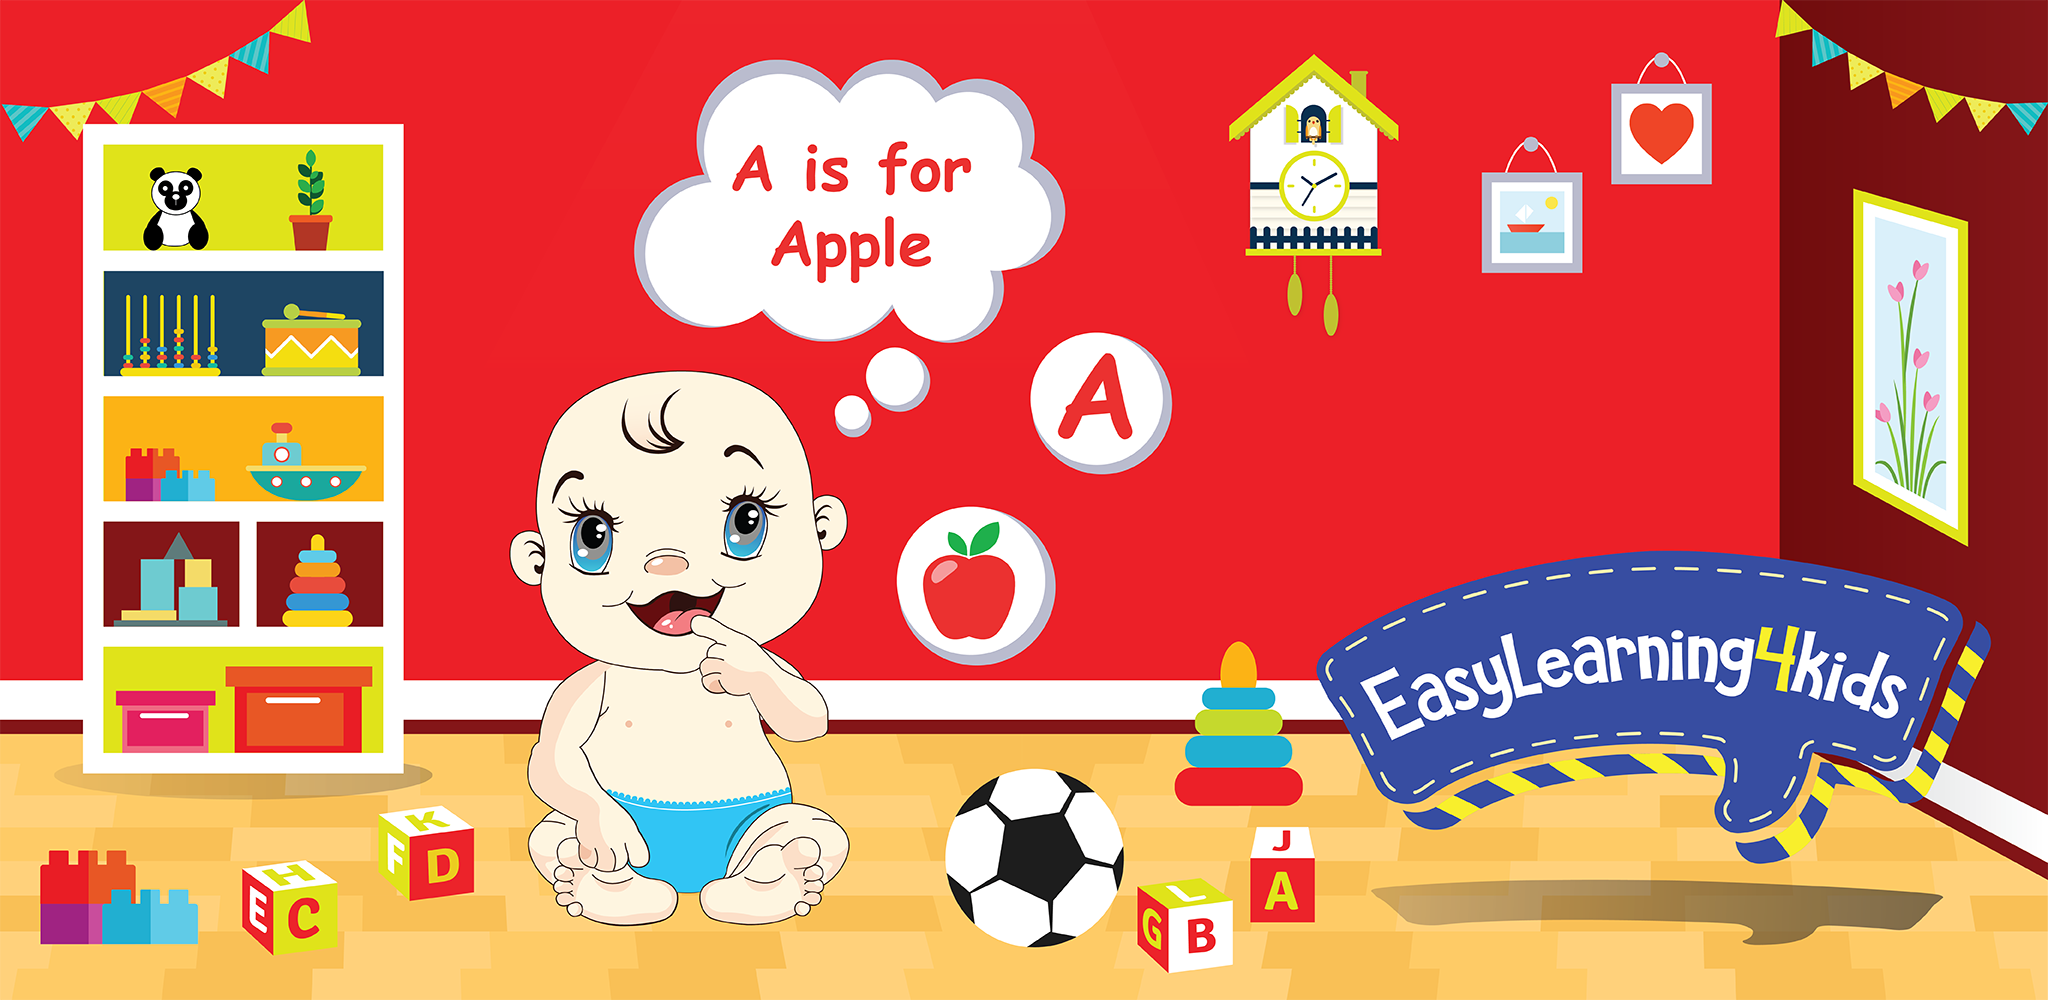 PS3G releases EasyLearning4Kids – #1 toddlers’ kids’ learning application